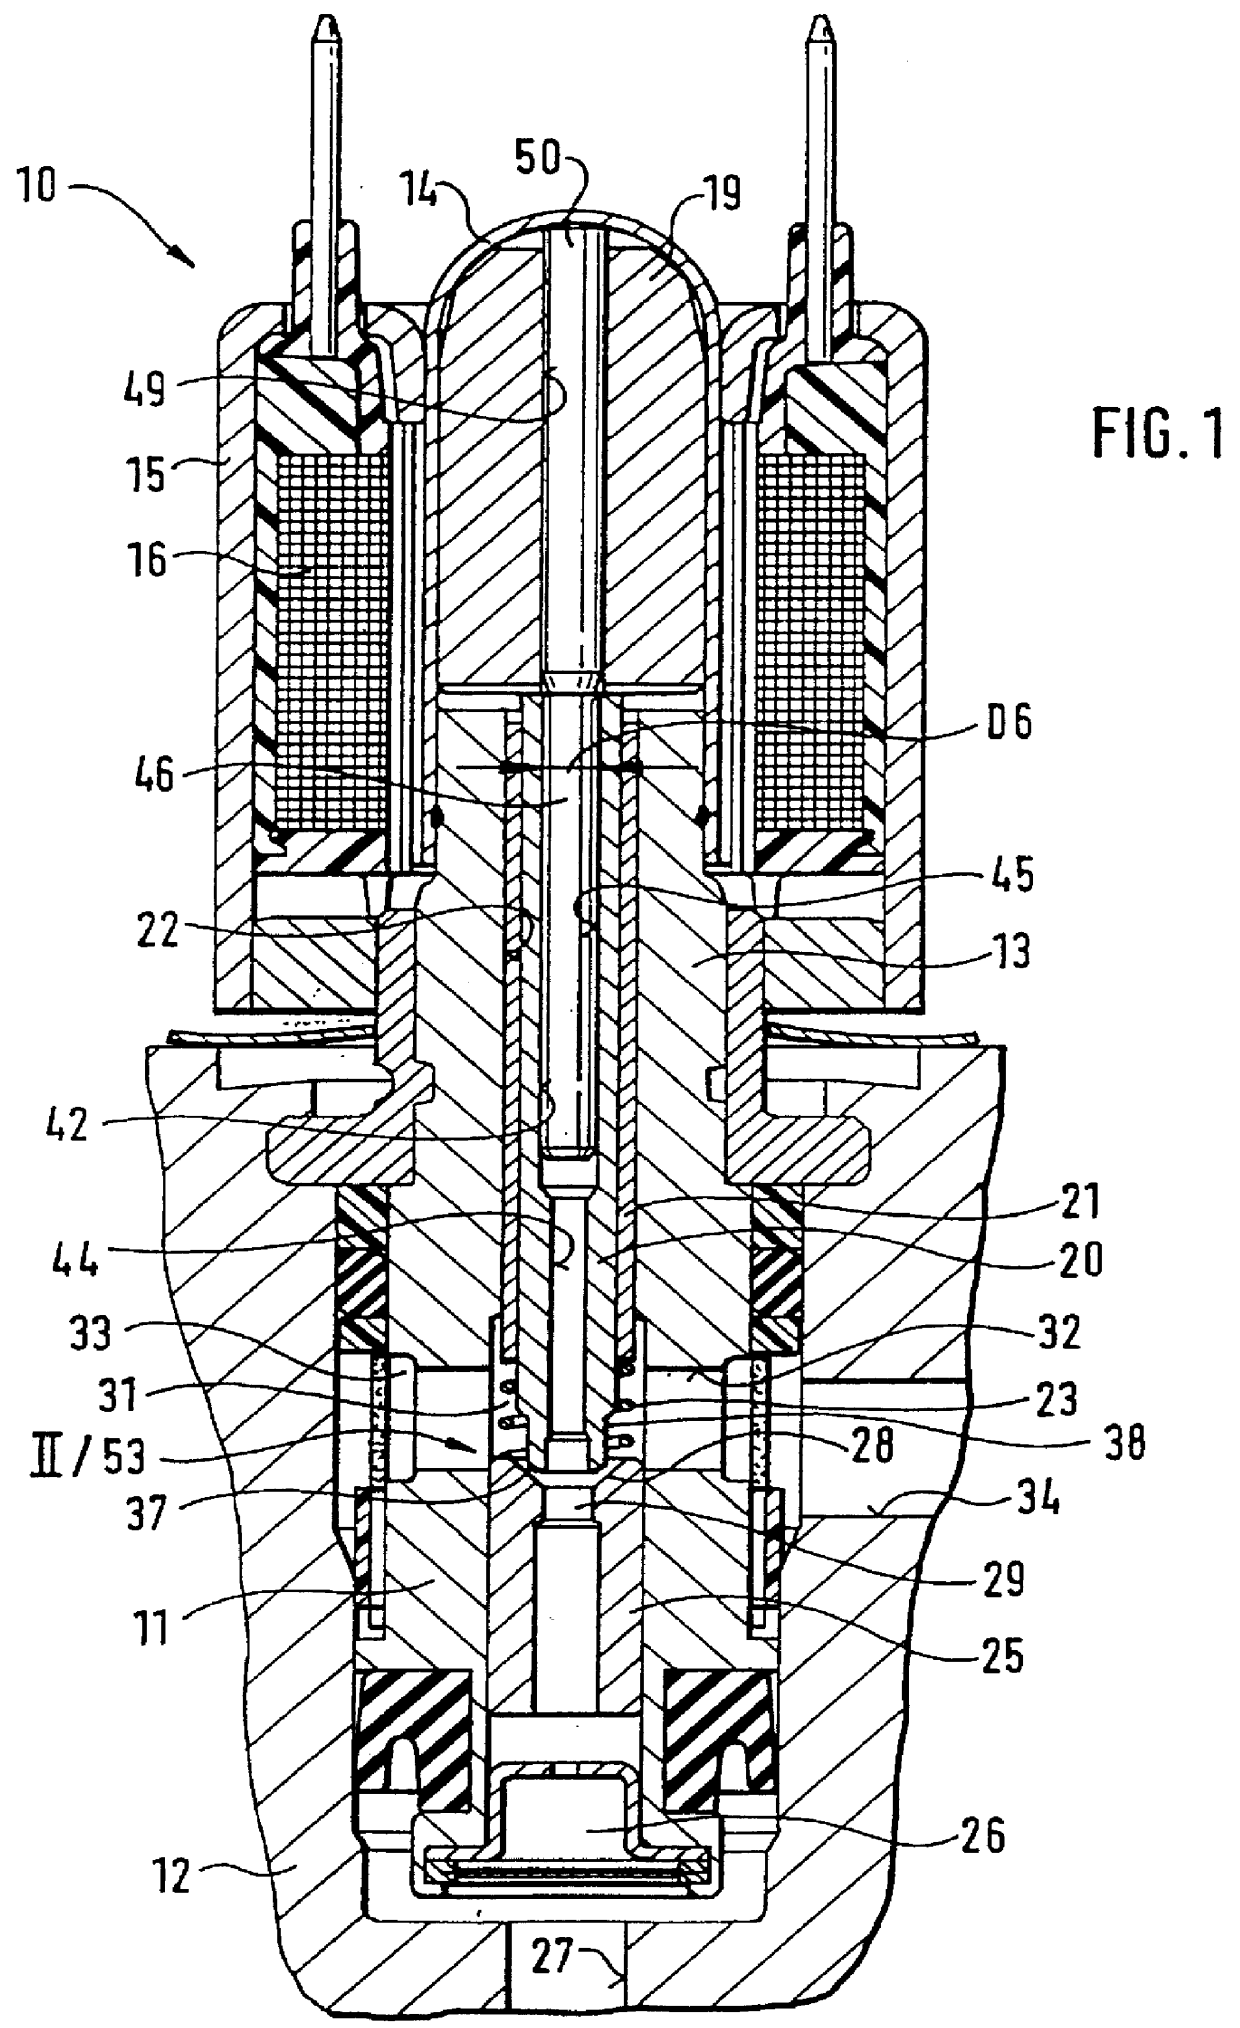 Electromagnetically actuated valve for hydraulic motor vehicle brake systems